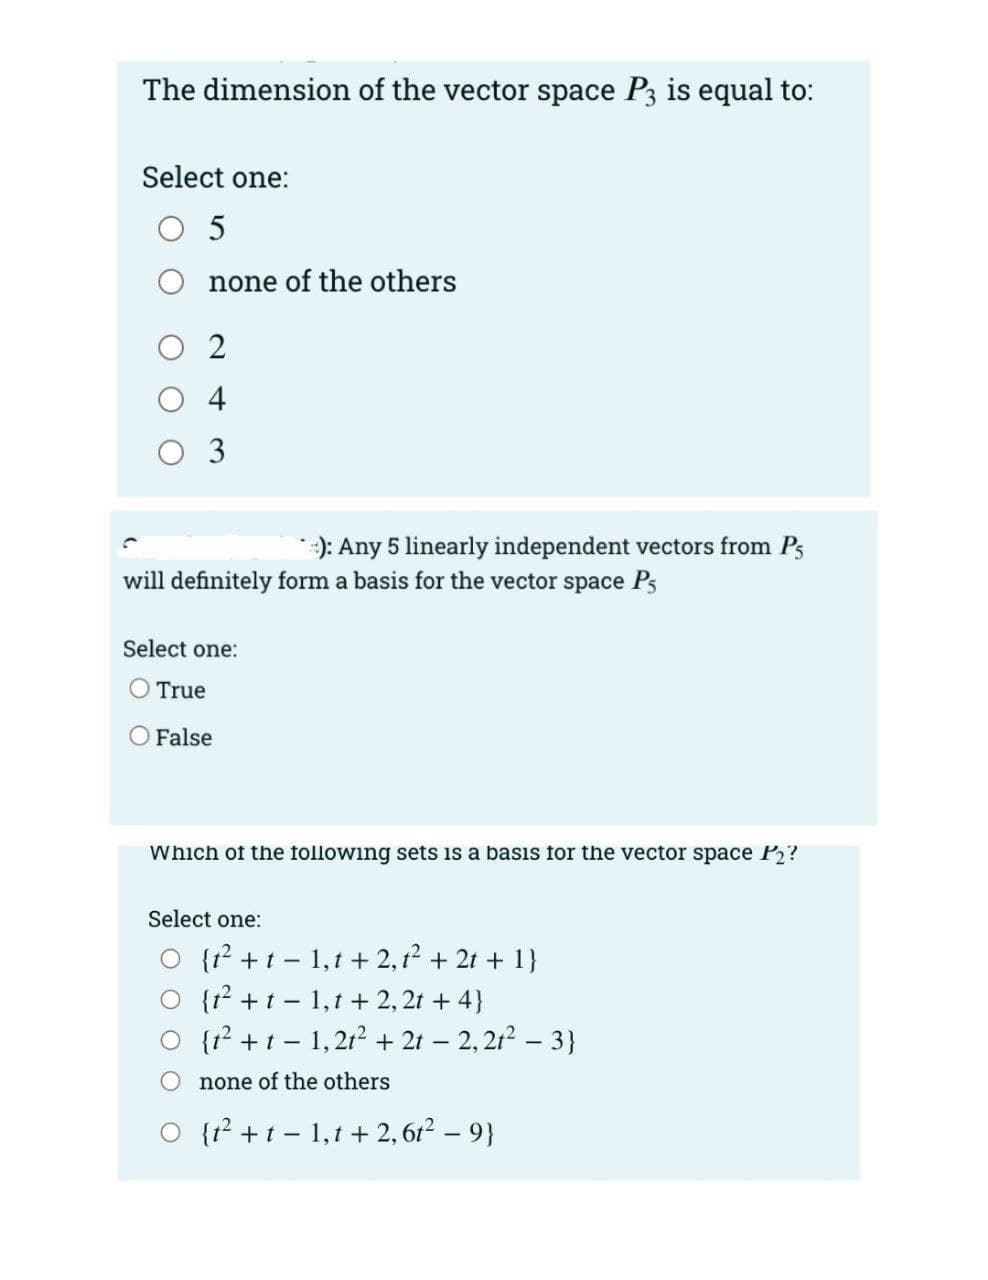 The dimension of the vector space P3 is equal to:
Select one:
O 5
none of the others
O 2
O 4
O 3
*:): Any 5 linearly independent vectors from Ps
will definitely form a basis for the vector space Ps
Select one:
O True
False
Which of the following sets is a basis for the vector space P2?
Select one:
O {r? +t - 1,t + 2,12 + 21 + 1}
O {t? +t - 1,1 + 2, 2t + 4}
O {1? +t - 1, 2t? + 2t – 2, 21? – 3}
none of the others
O {r² +t - 1,1 + 2, 6r2 – 9}
